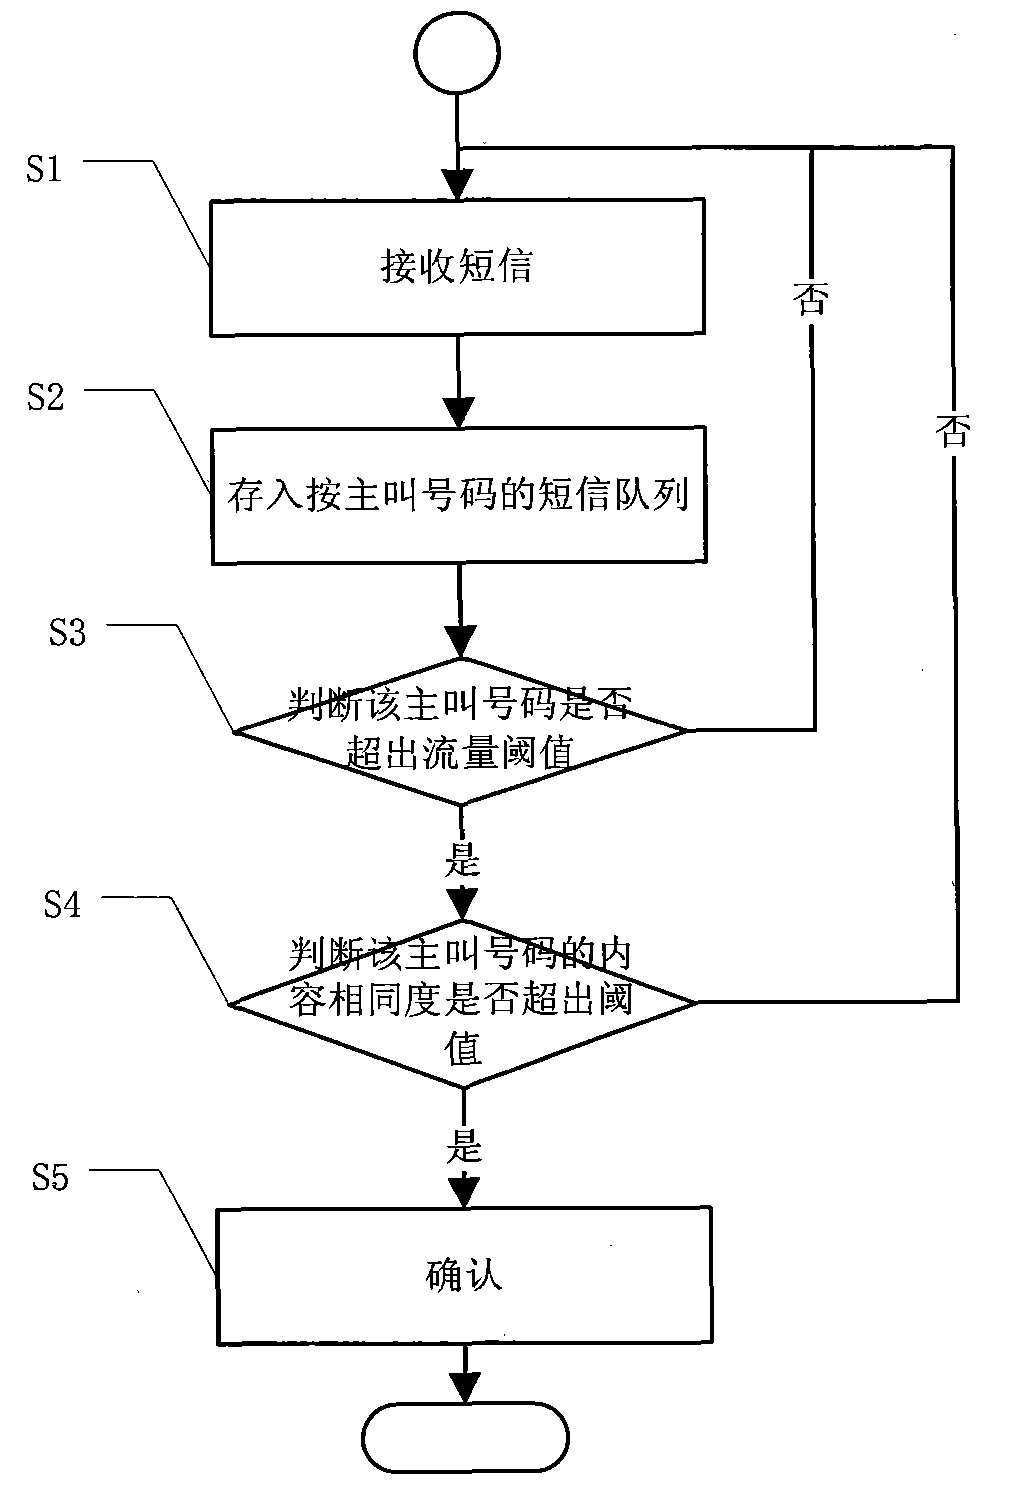 Method based on content similarity for improving recognition accuracy of spam message numbers